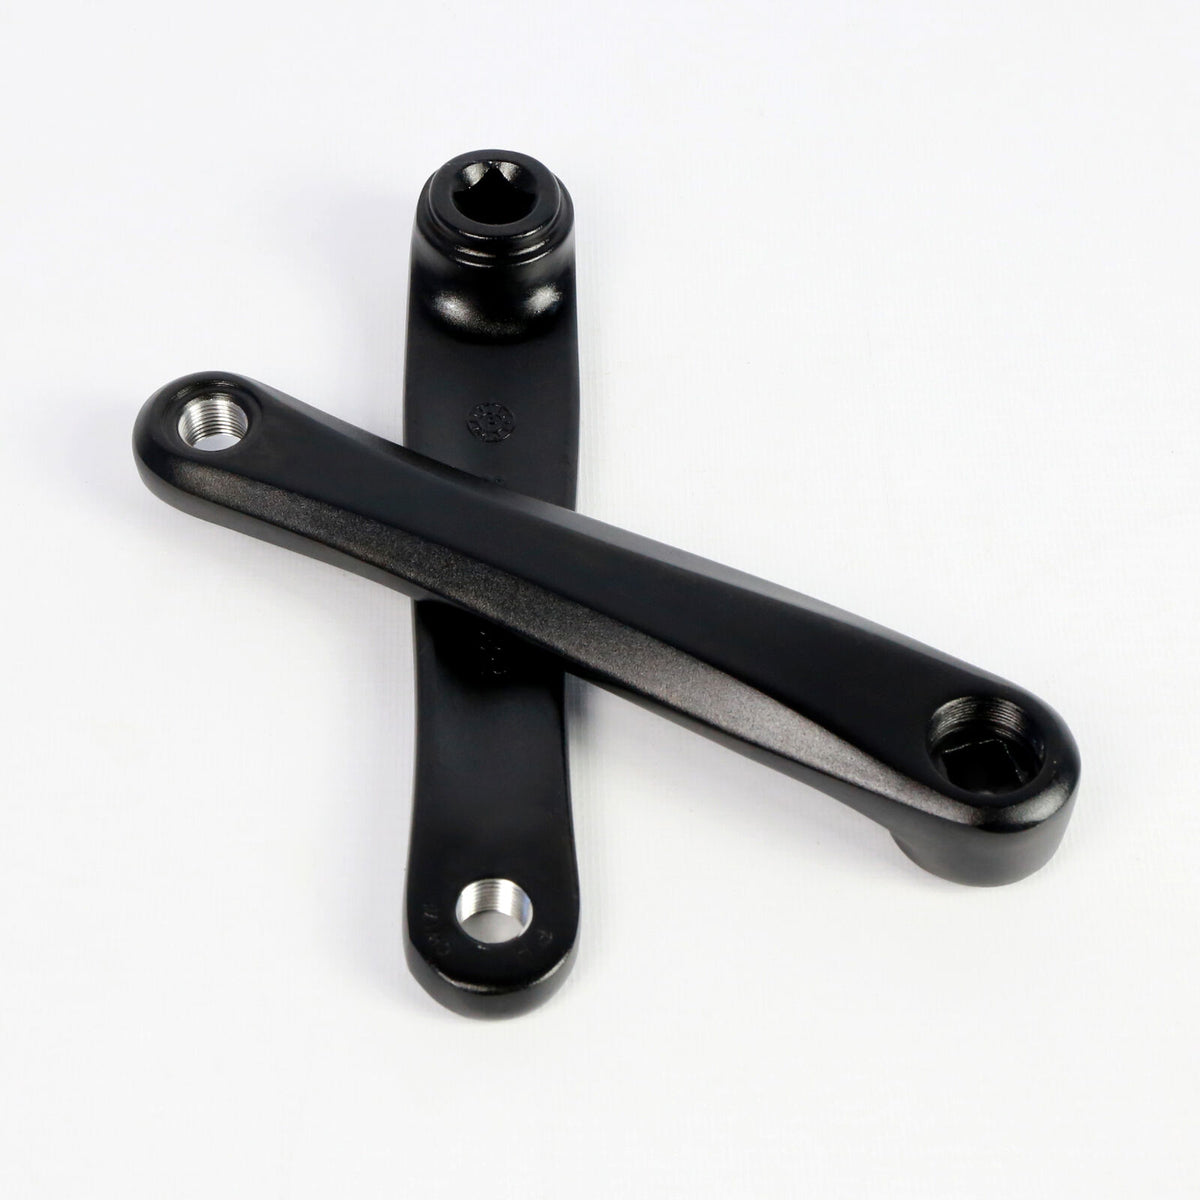 170mm Stock Crank Arms for Bafang BBS Series